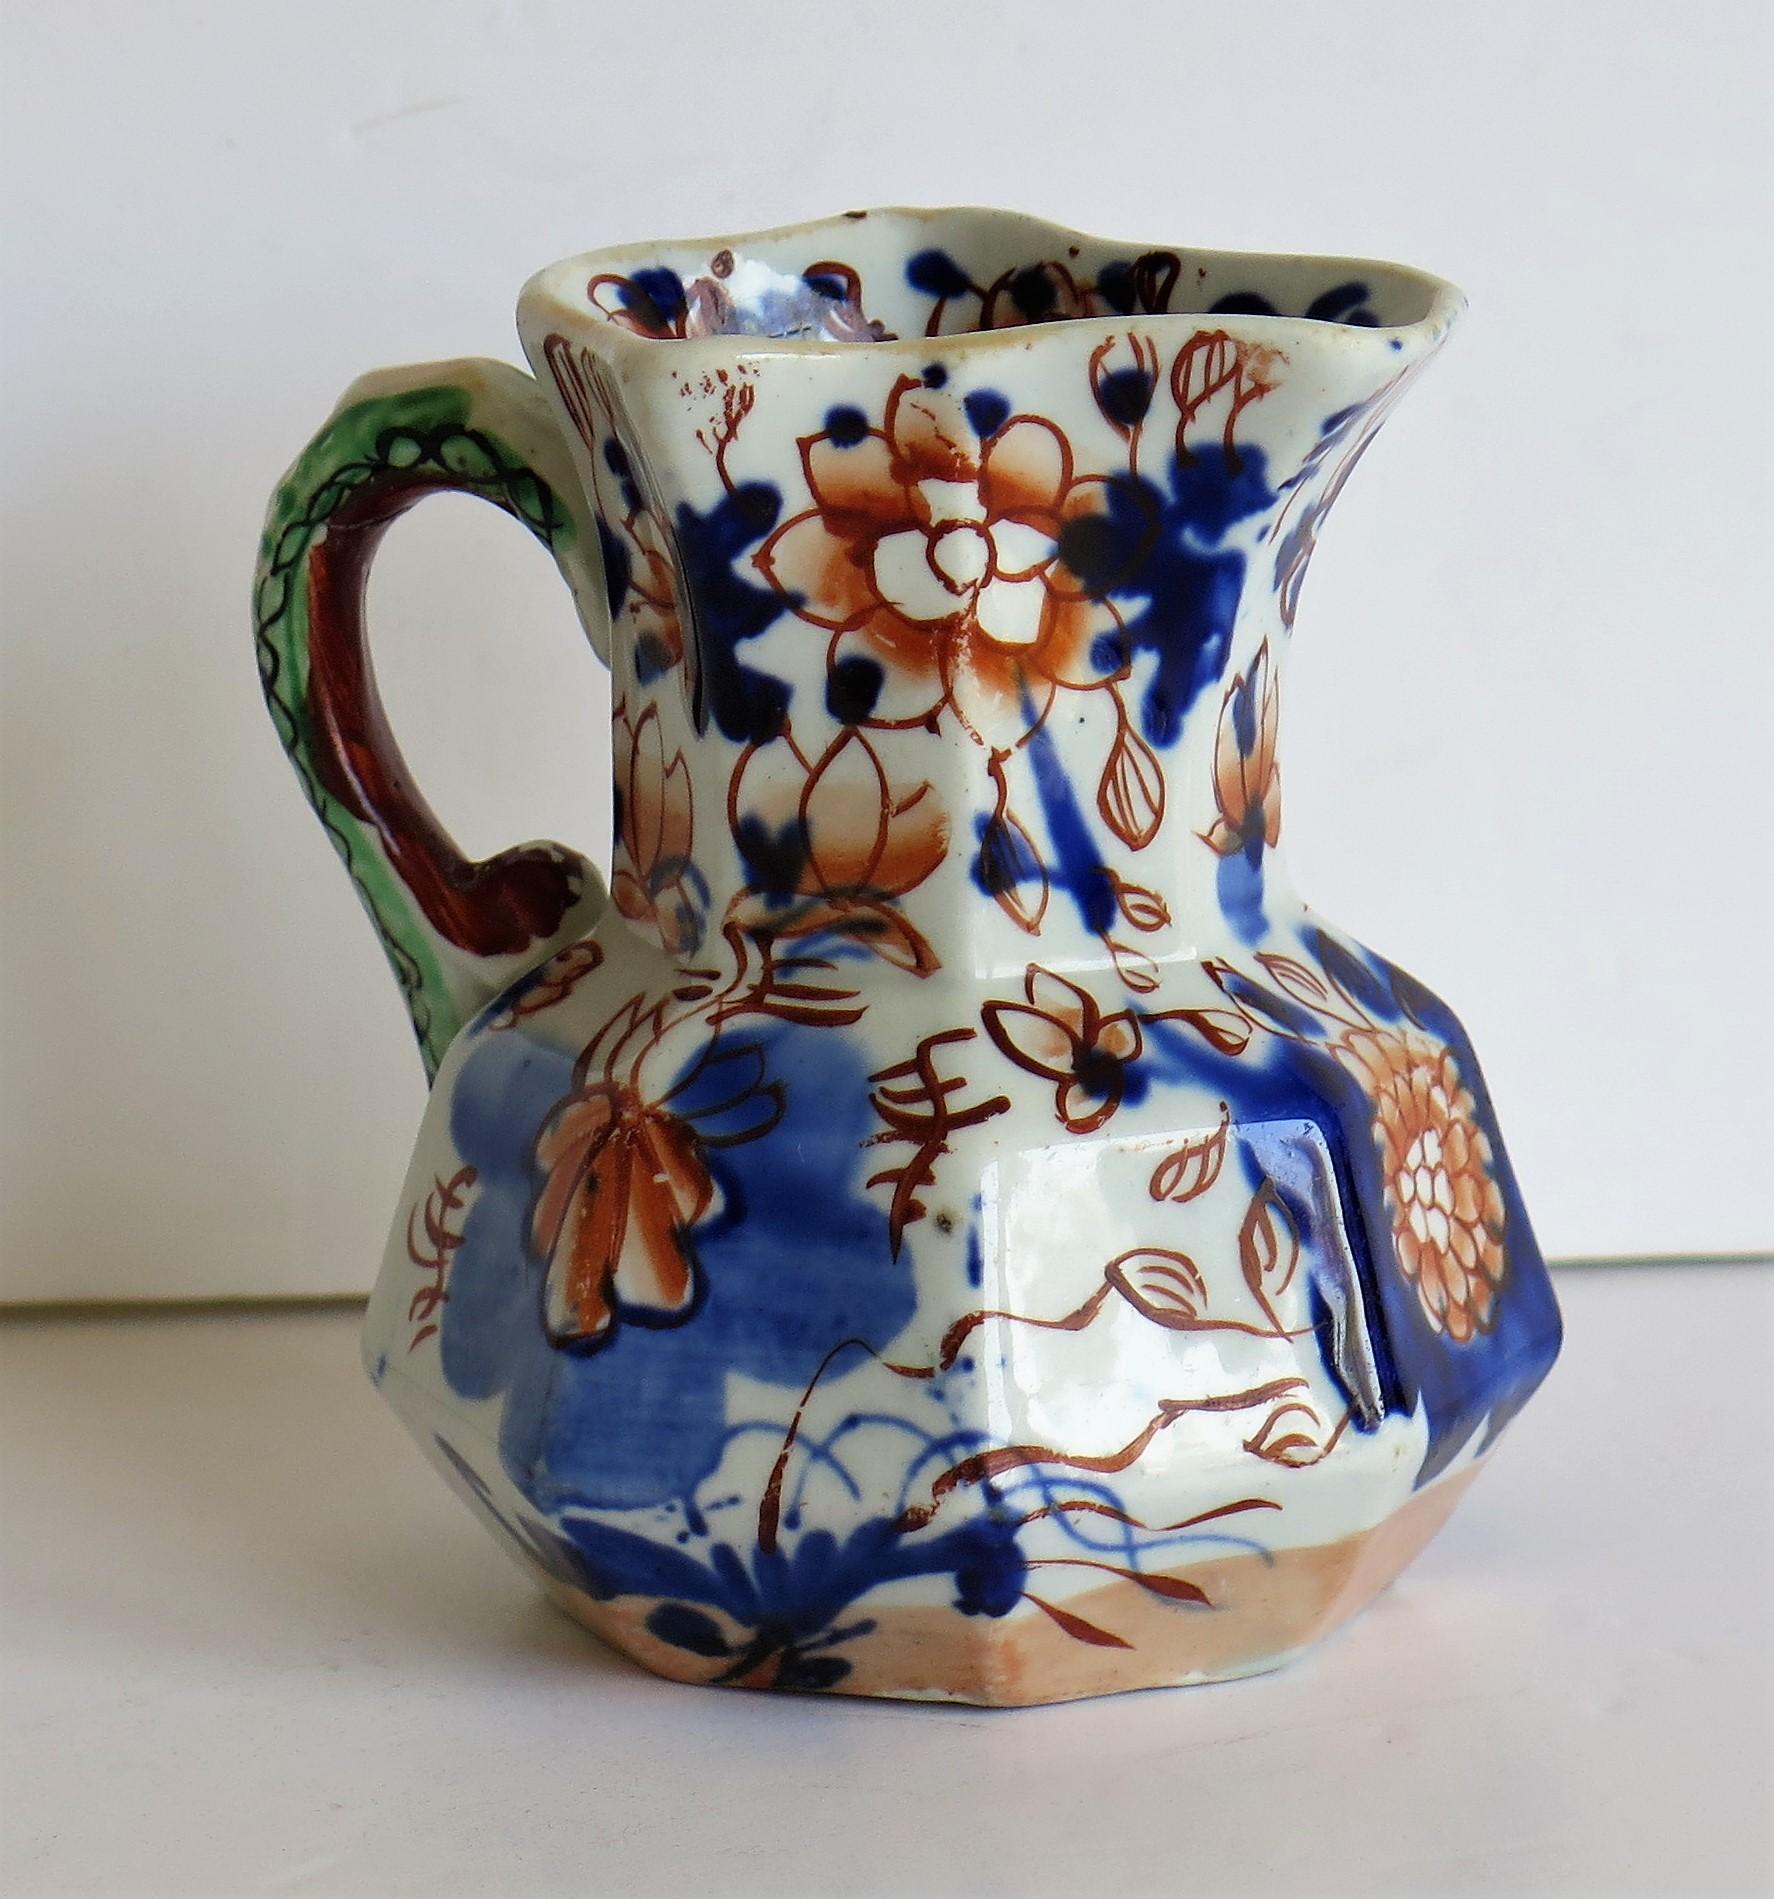 This is a good, very early Mason's ironstone Hydra jug, hand painted in the Japan basket pattern, circa 1813-1815, which is the late George 111rd period.

The jug has an octagonal shape with a notched snake handle and is hand decorated in the